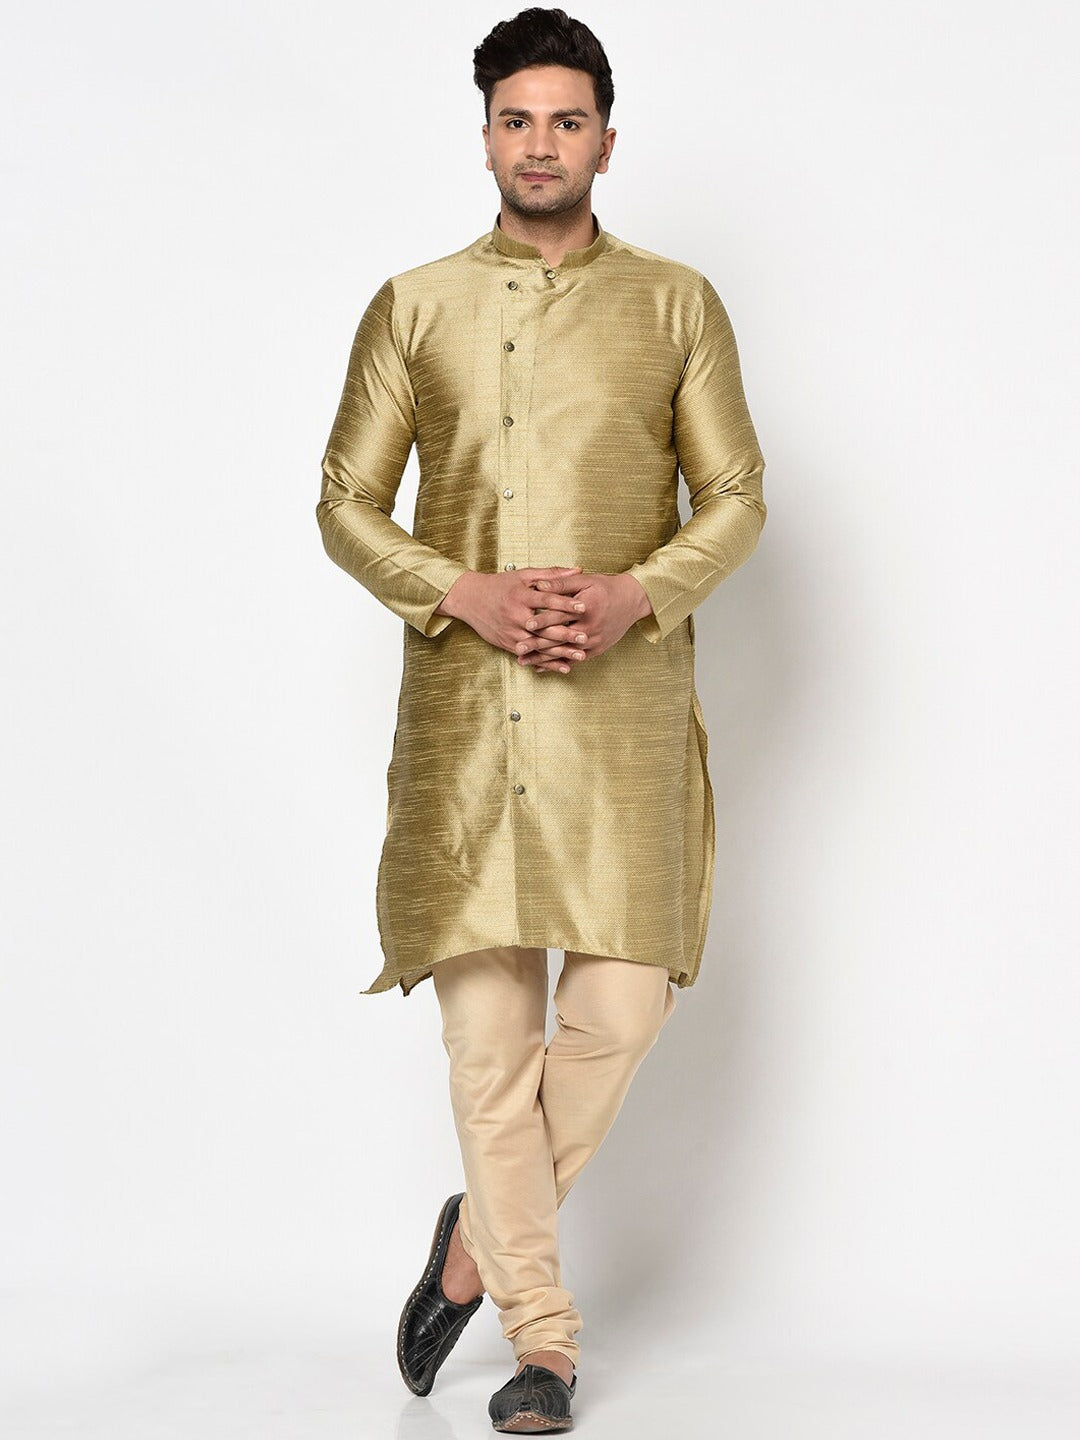 Solid Beige Slim-Fit Churidar Indian Clothing in Denver, CO, Aurora, CO, Boulder, CO, Fort Collins, CO, Colorado Springs, CO, Parker, CO, Highlands Ranch, CO, Cherry Creek, CO, Centennial, CO, and Longmont, CO. NATIONWIDE SHIPPING USA- India Fashion X